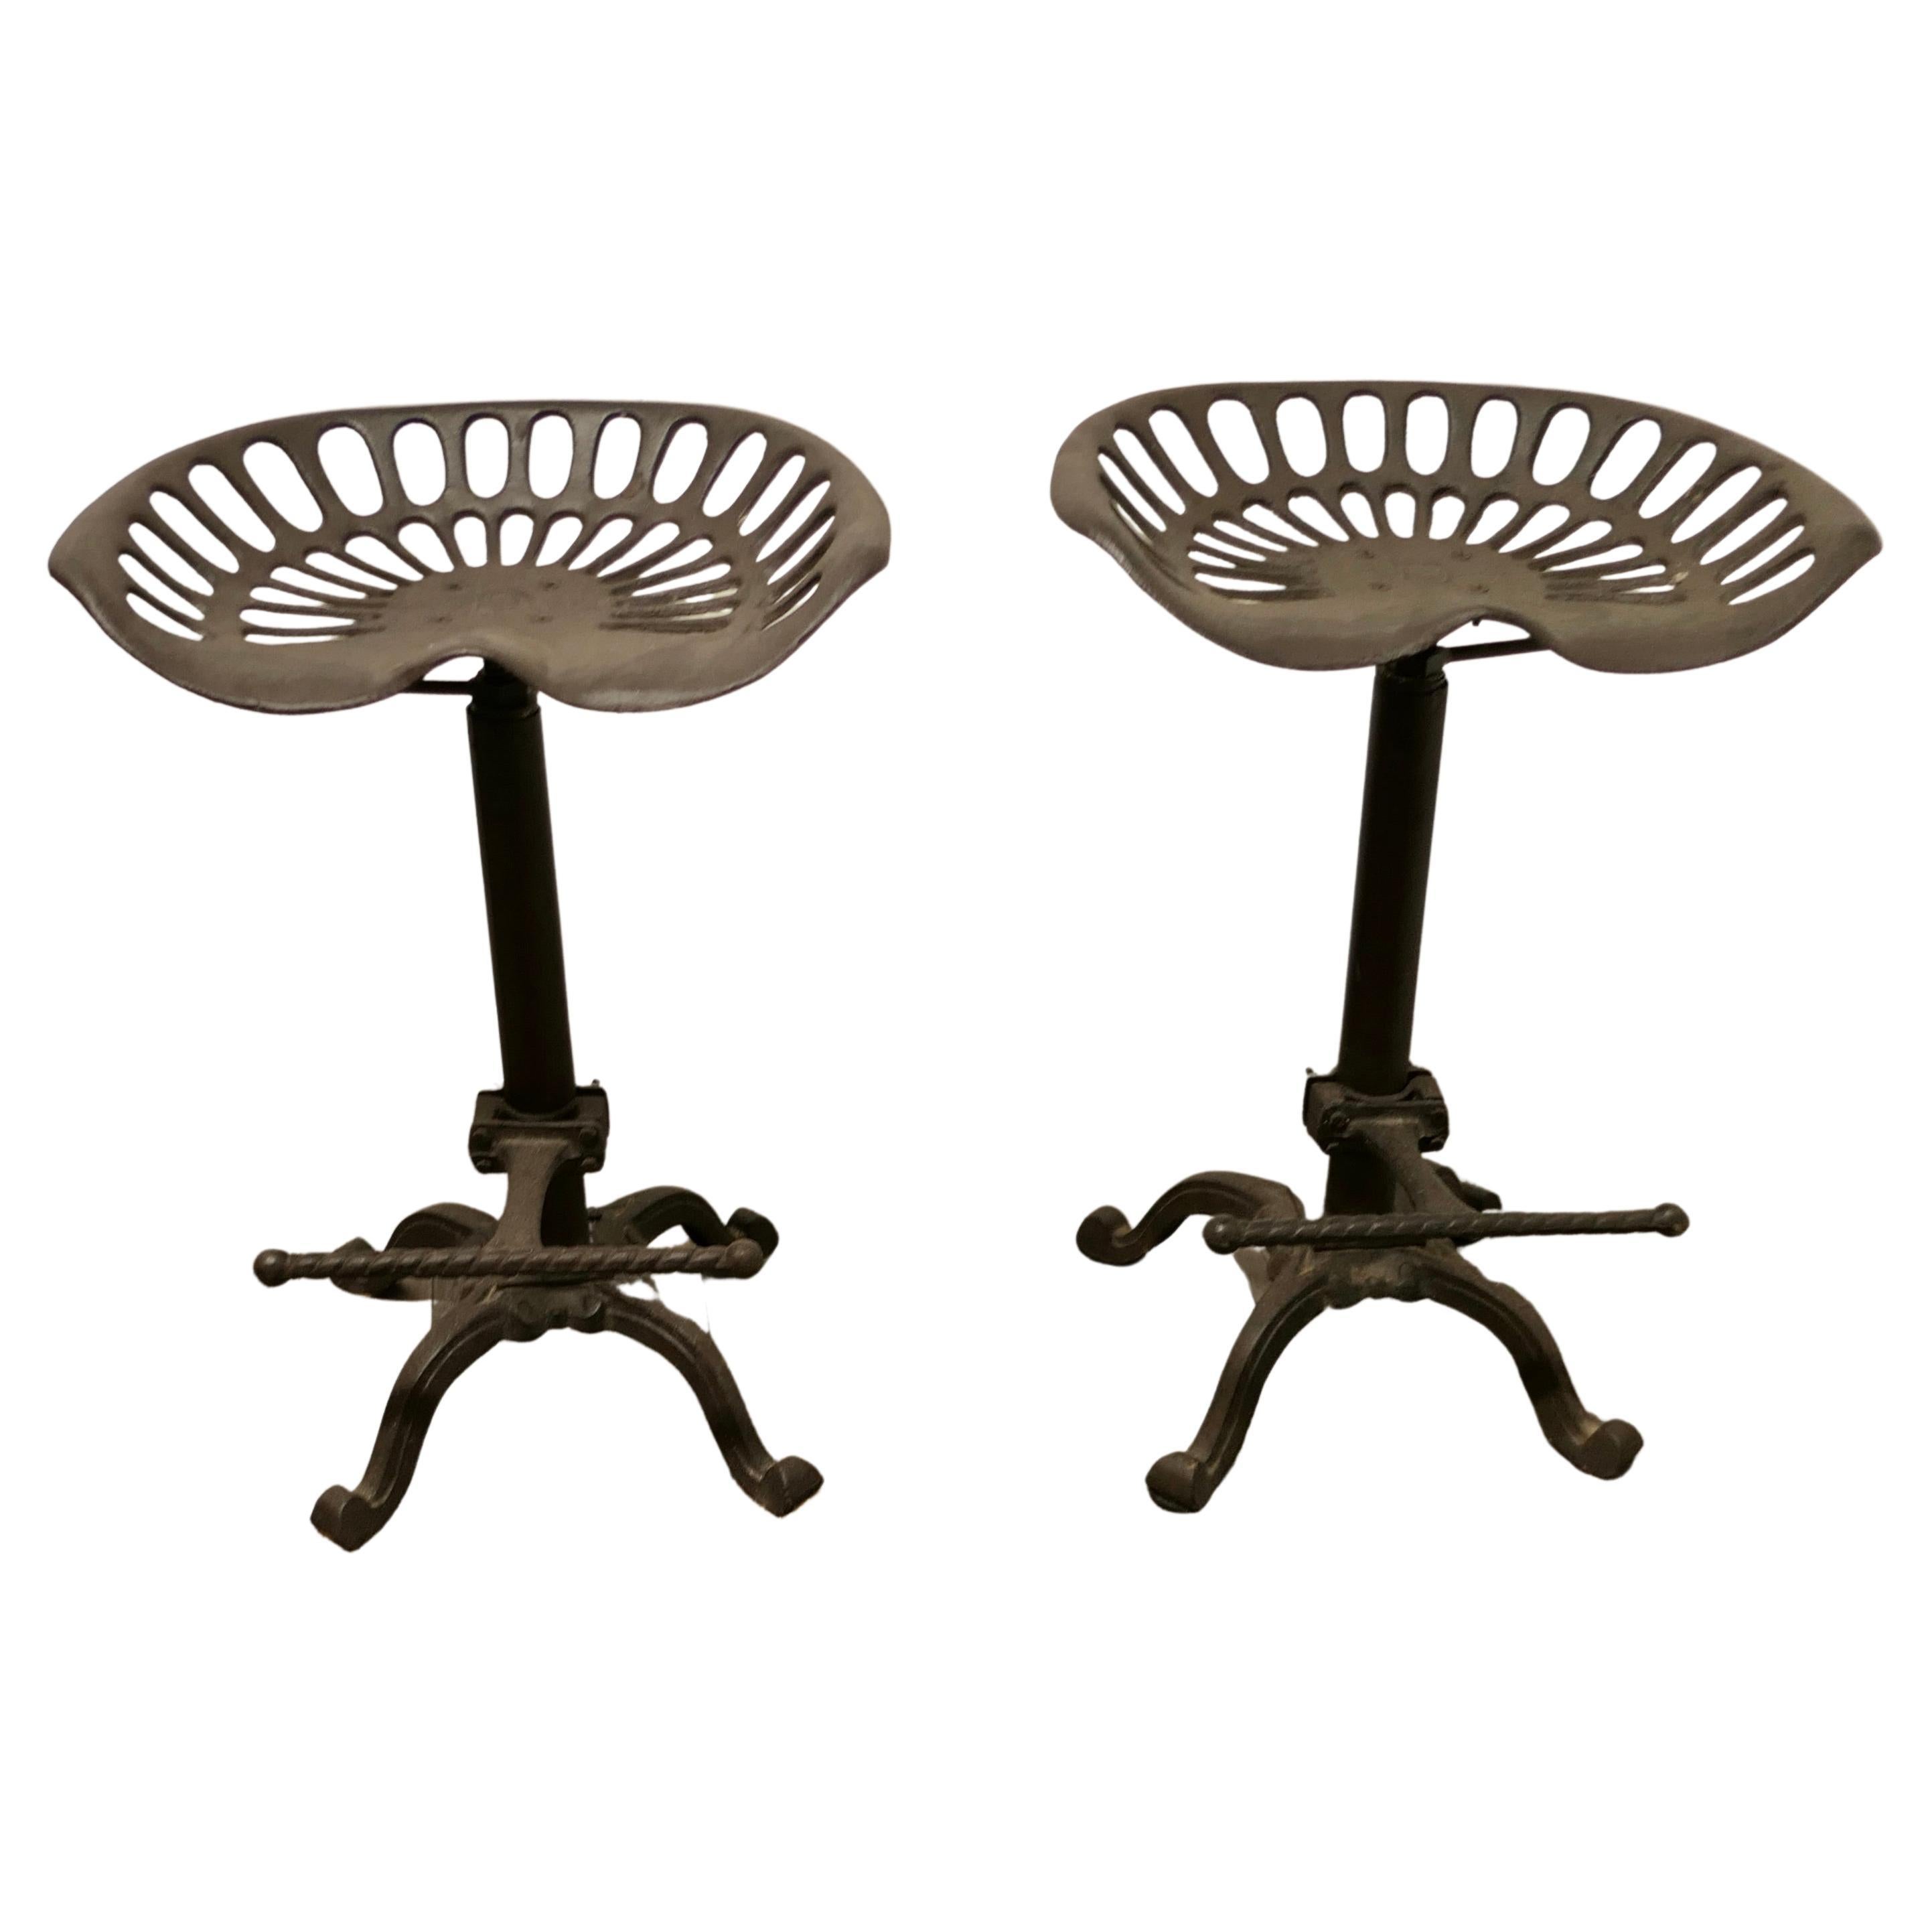 Pair of Quirky Tractor Seat Kitchen/Bar High Stools For Sale